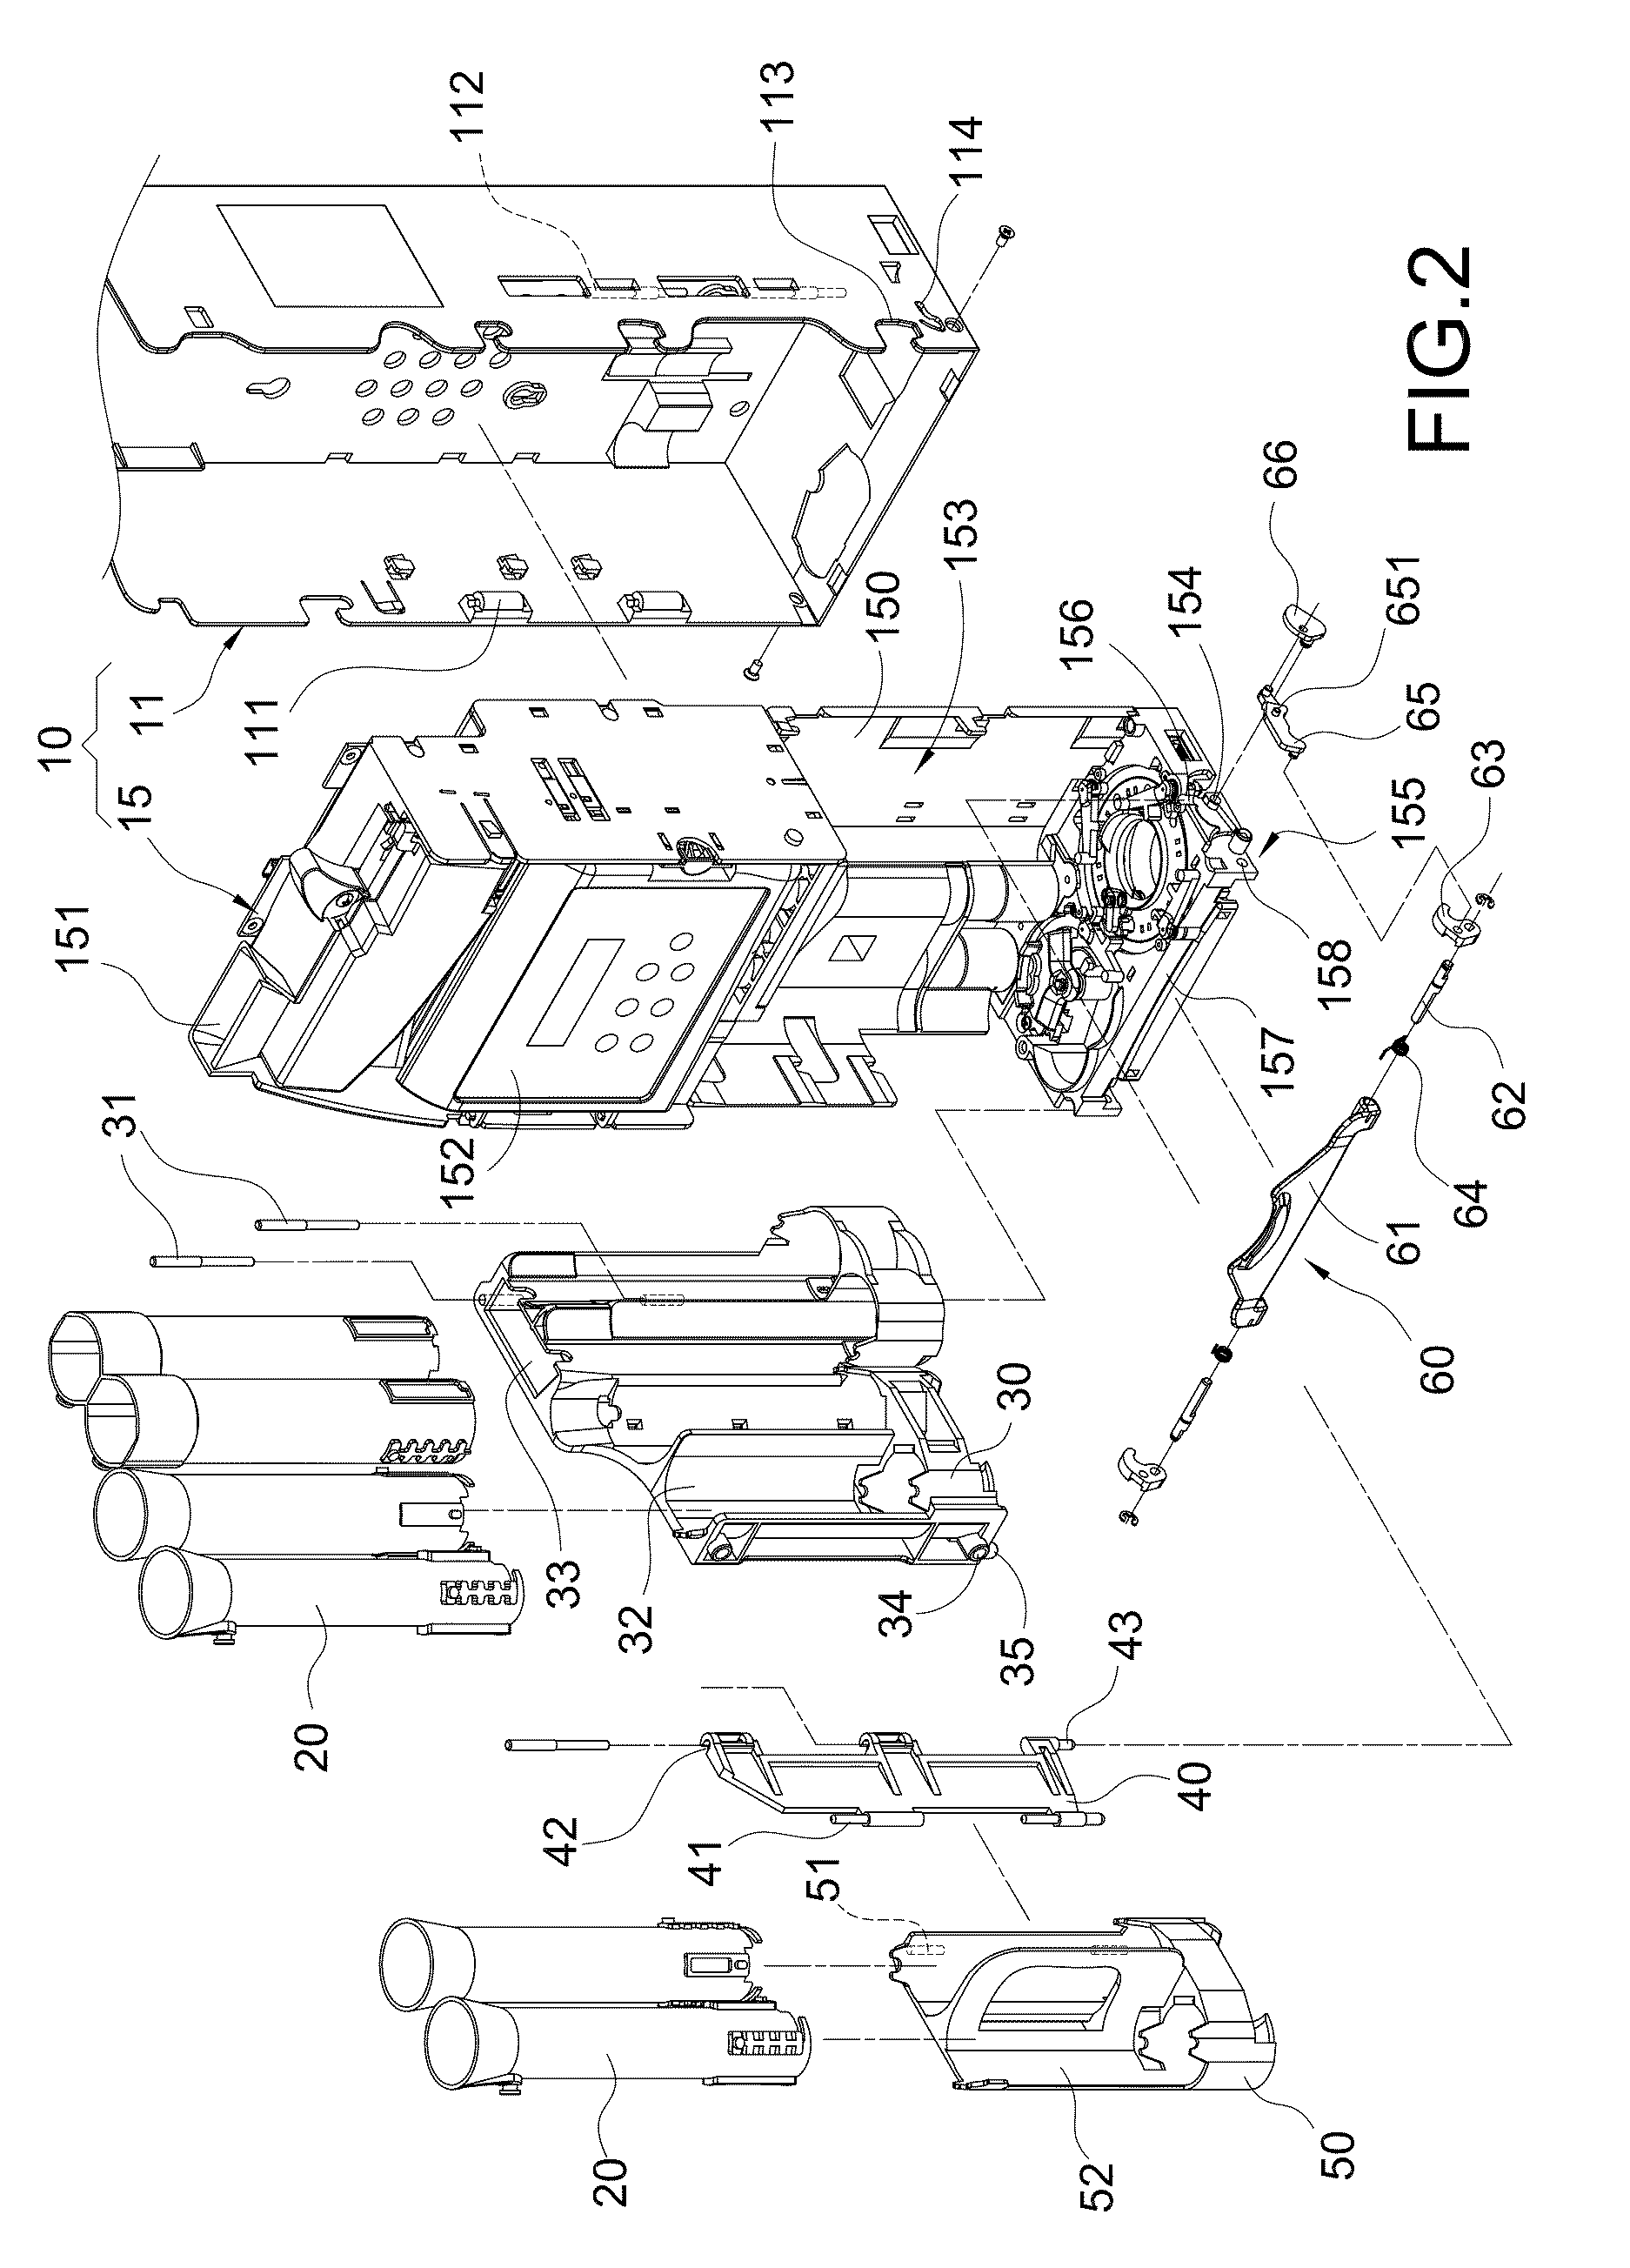 Coin dispensing and storing device